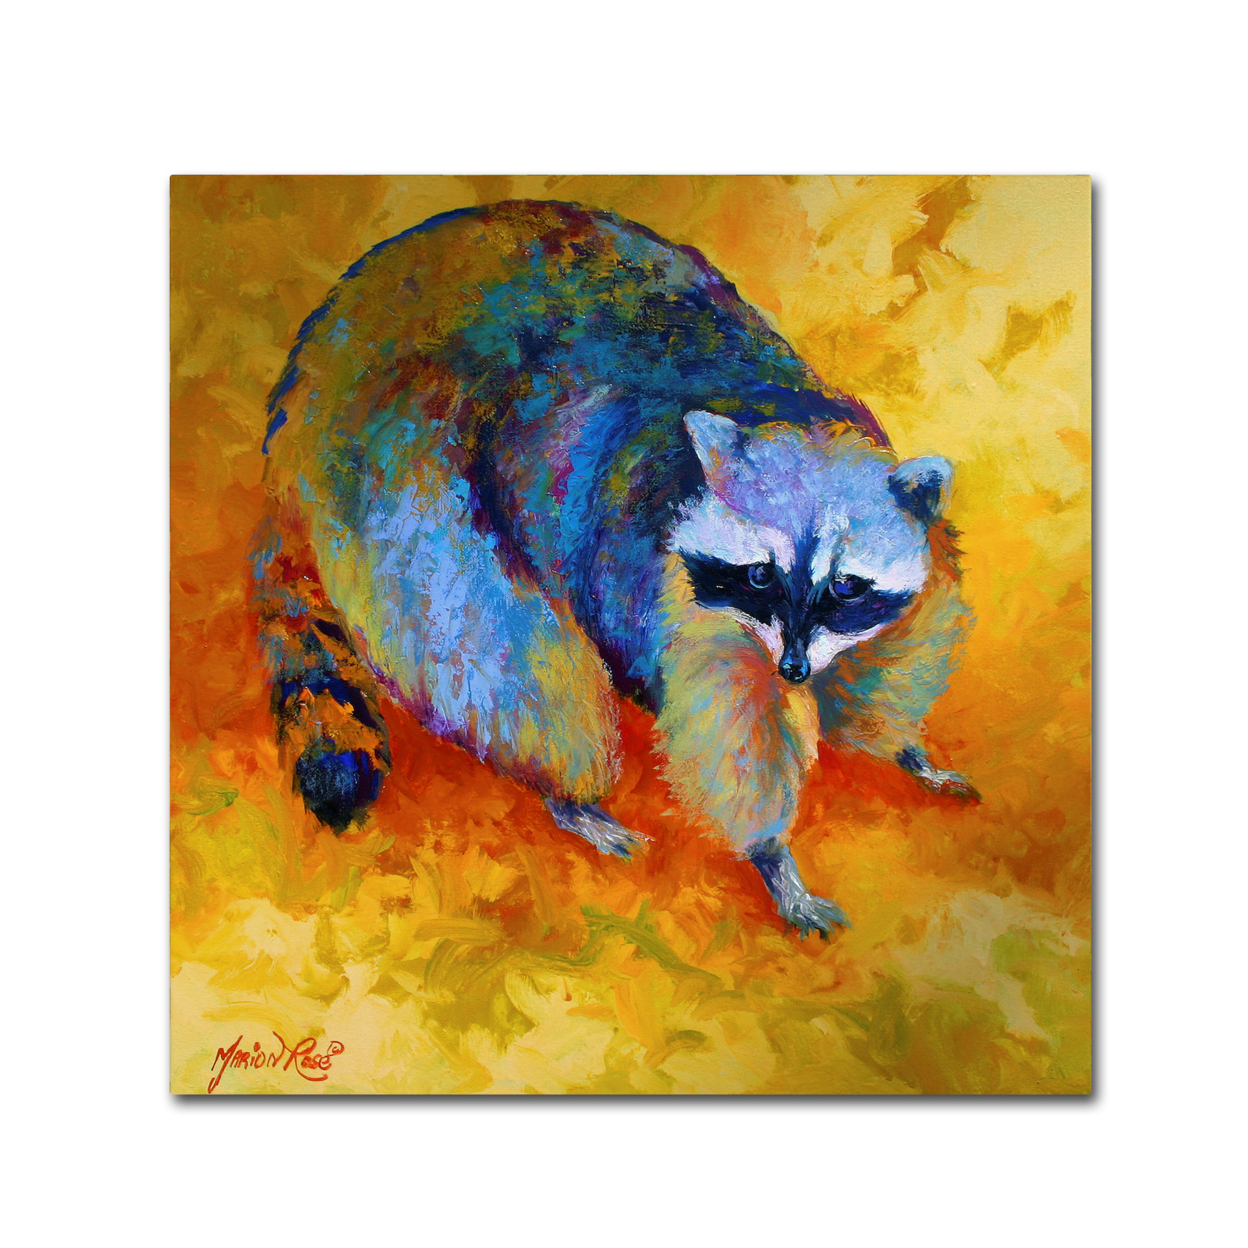 Marion Rose 'Coon' Ready To Hang Canvas Art 24 X 24 Inches Made In USA